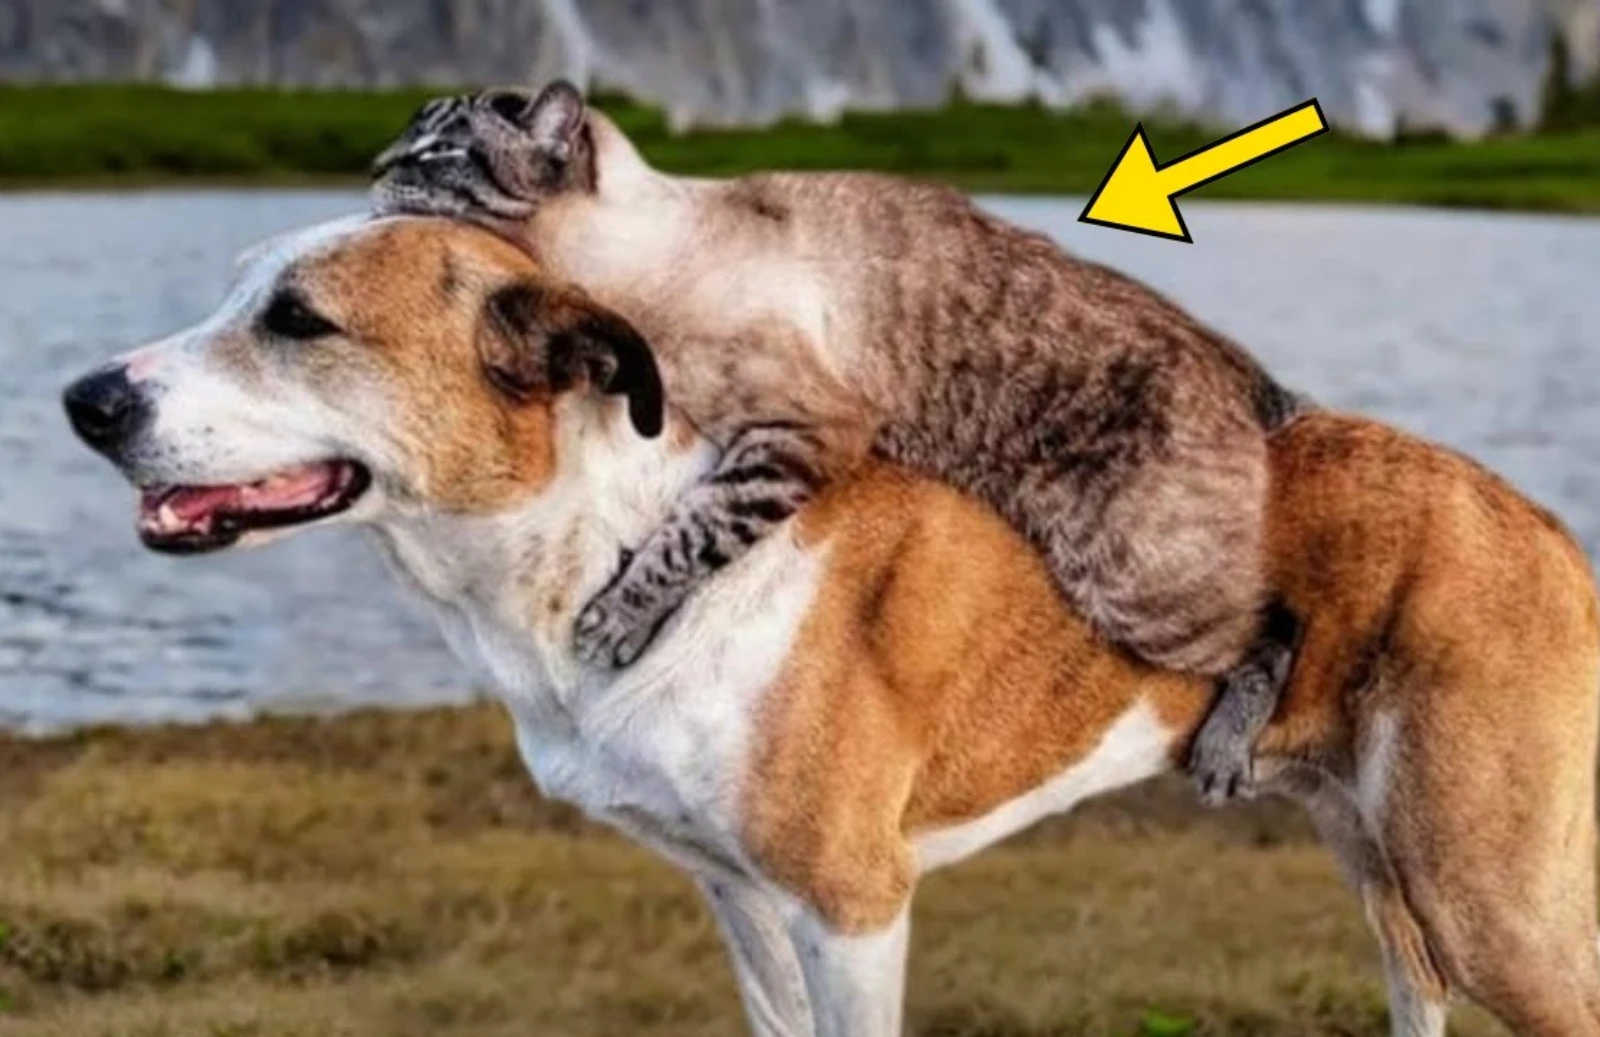 Dog Carries Injured Cat To The Vet. Vet Turns Pale Upon Realizing Who The Cat Belongs To